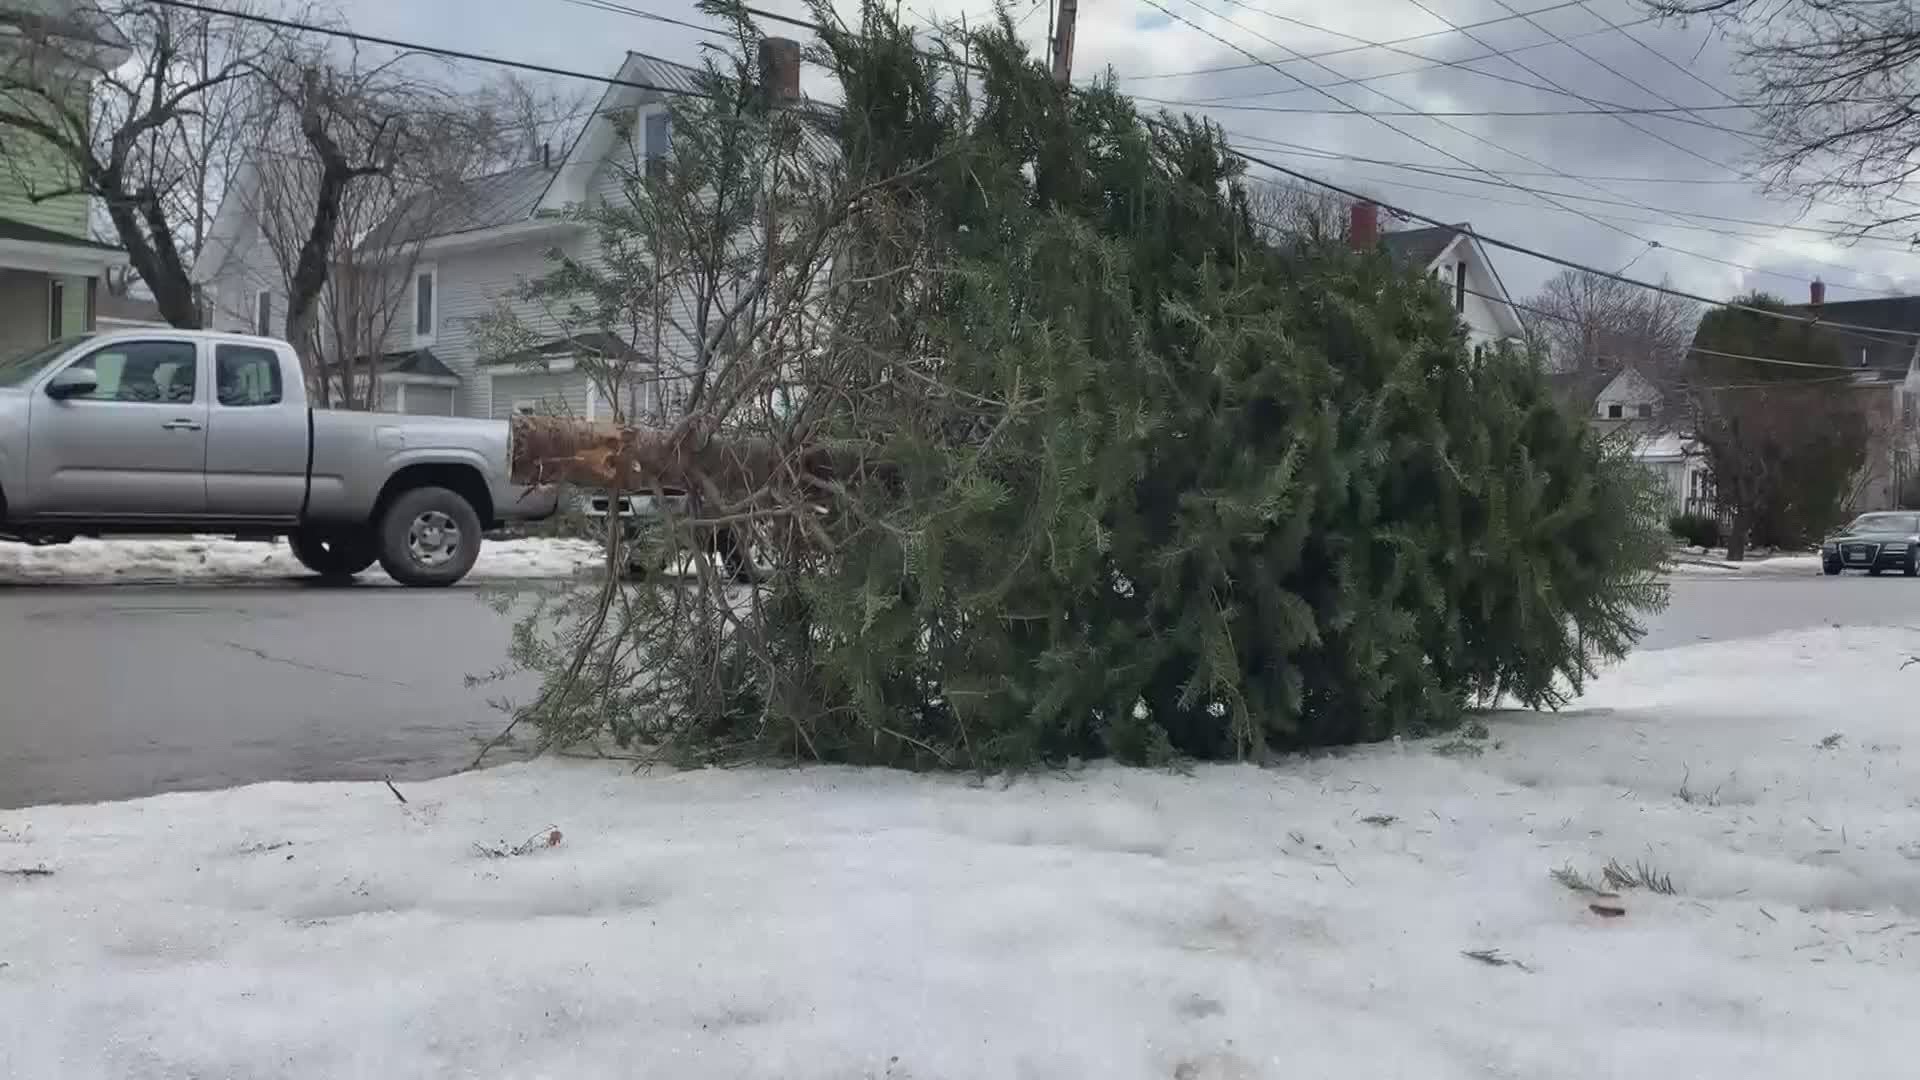 City provides help for residents to dispose of holiday trash, trees